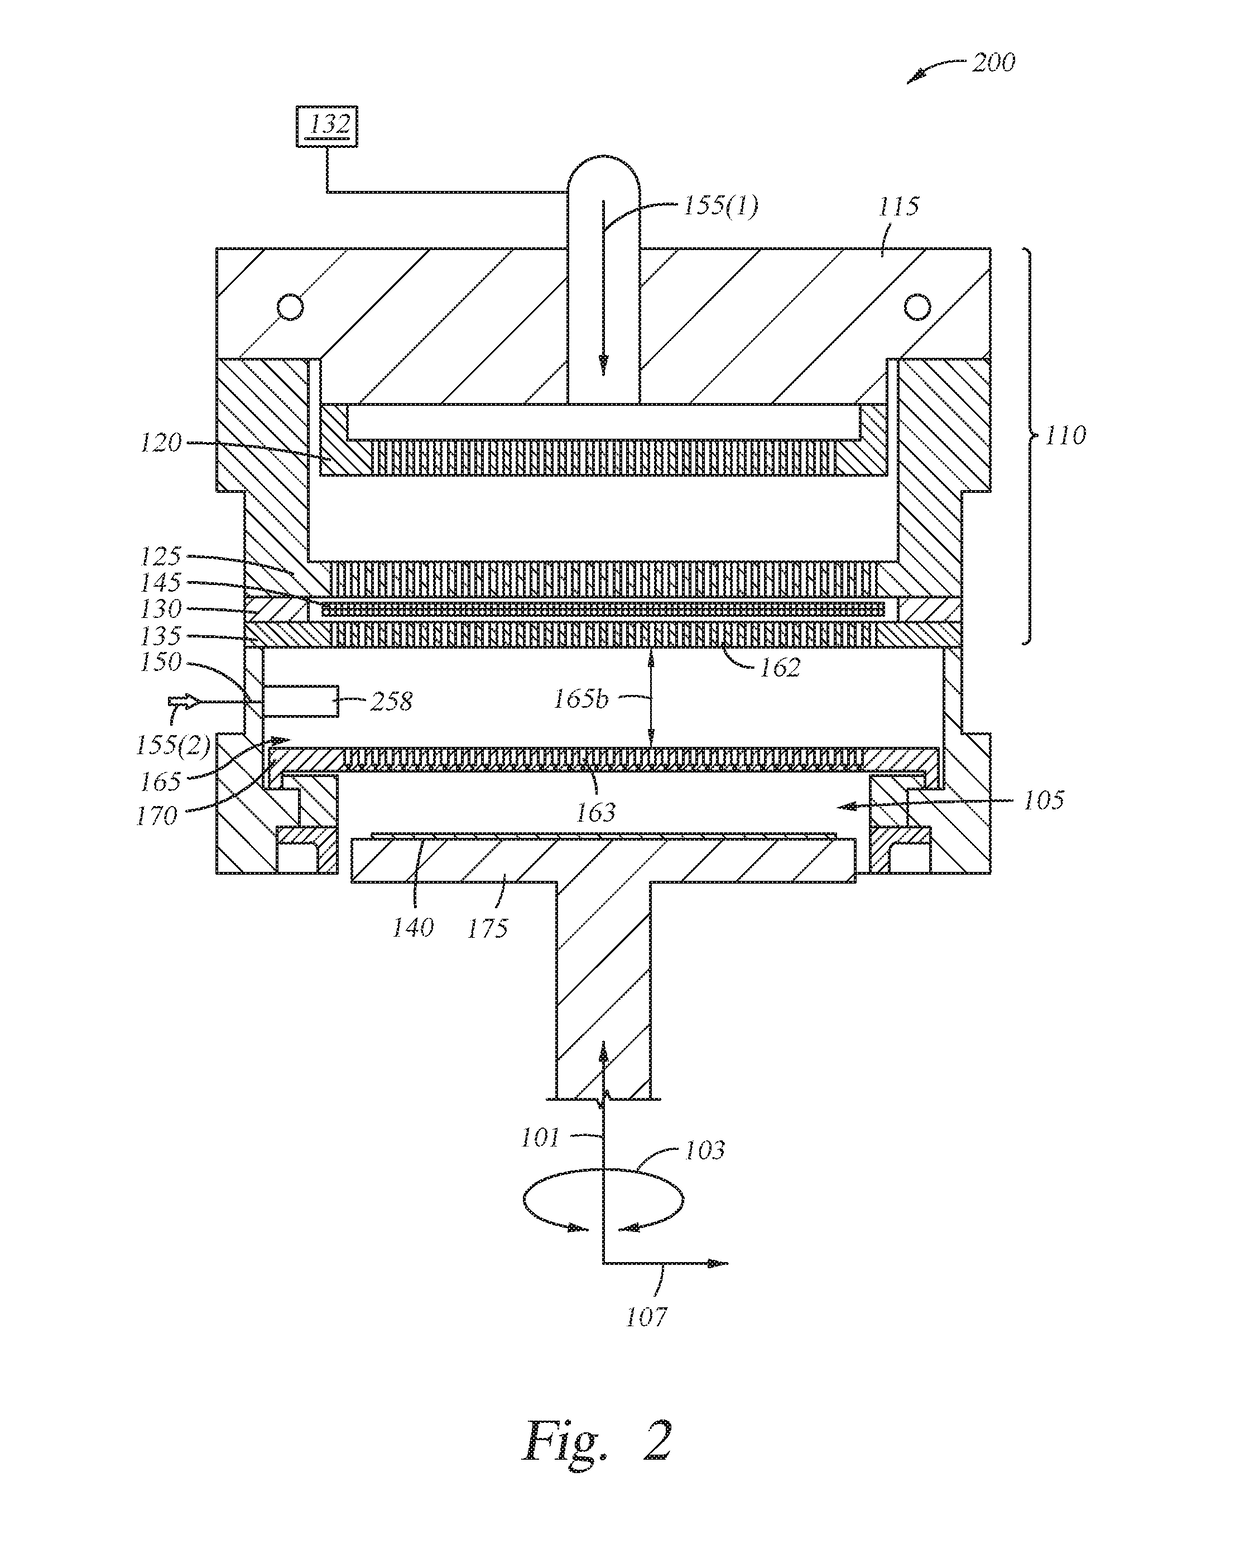 Flow distribution plate for surface fluorine reduction